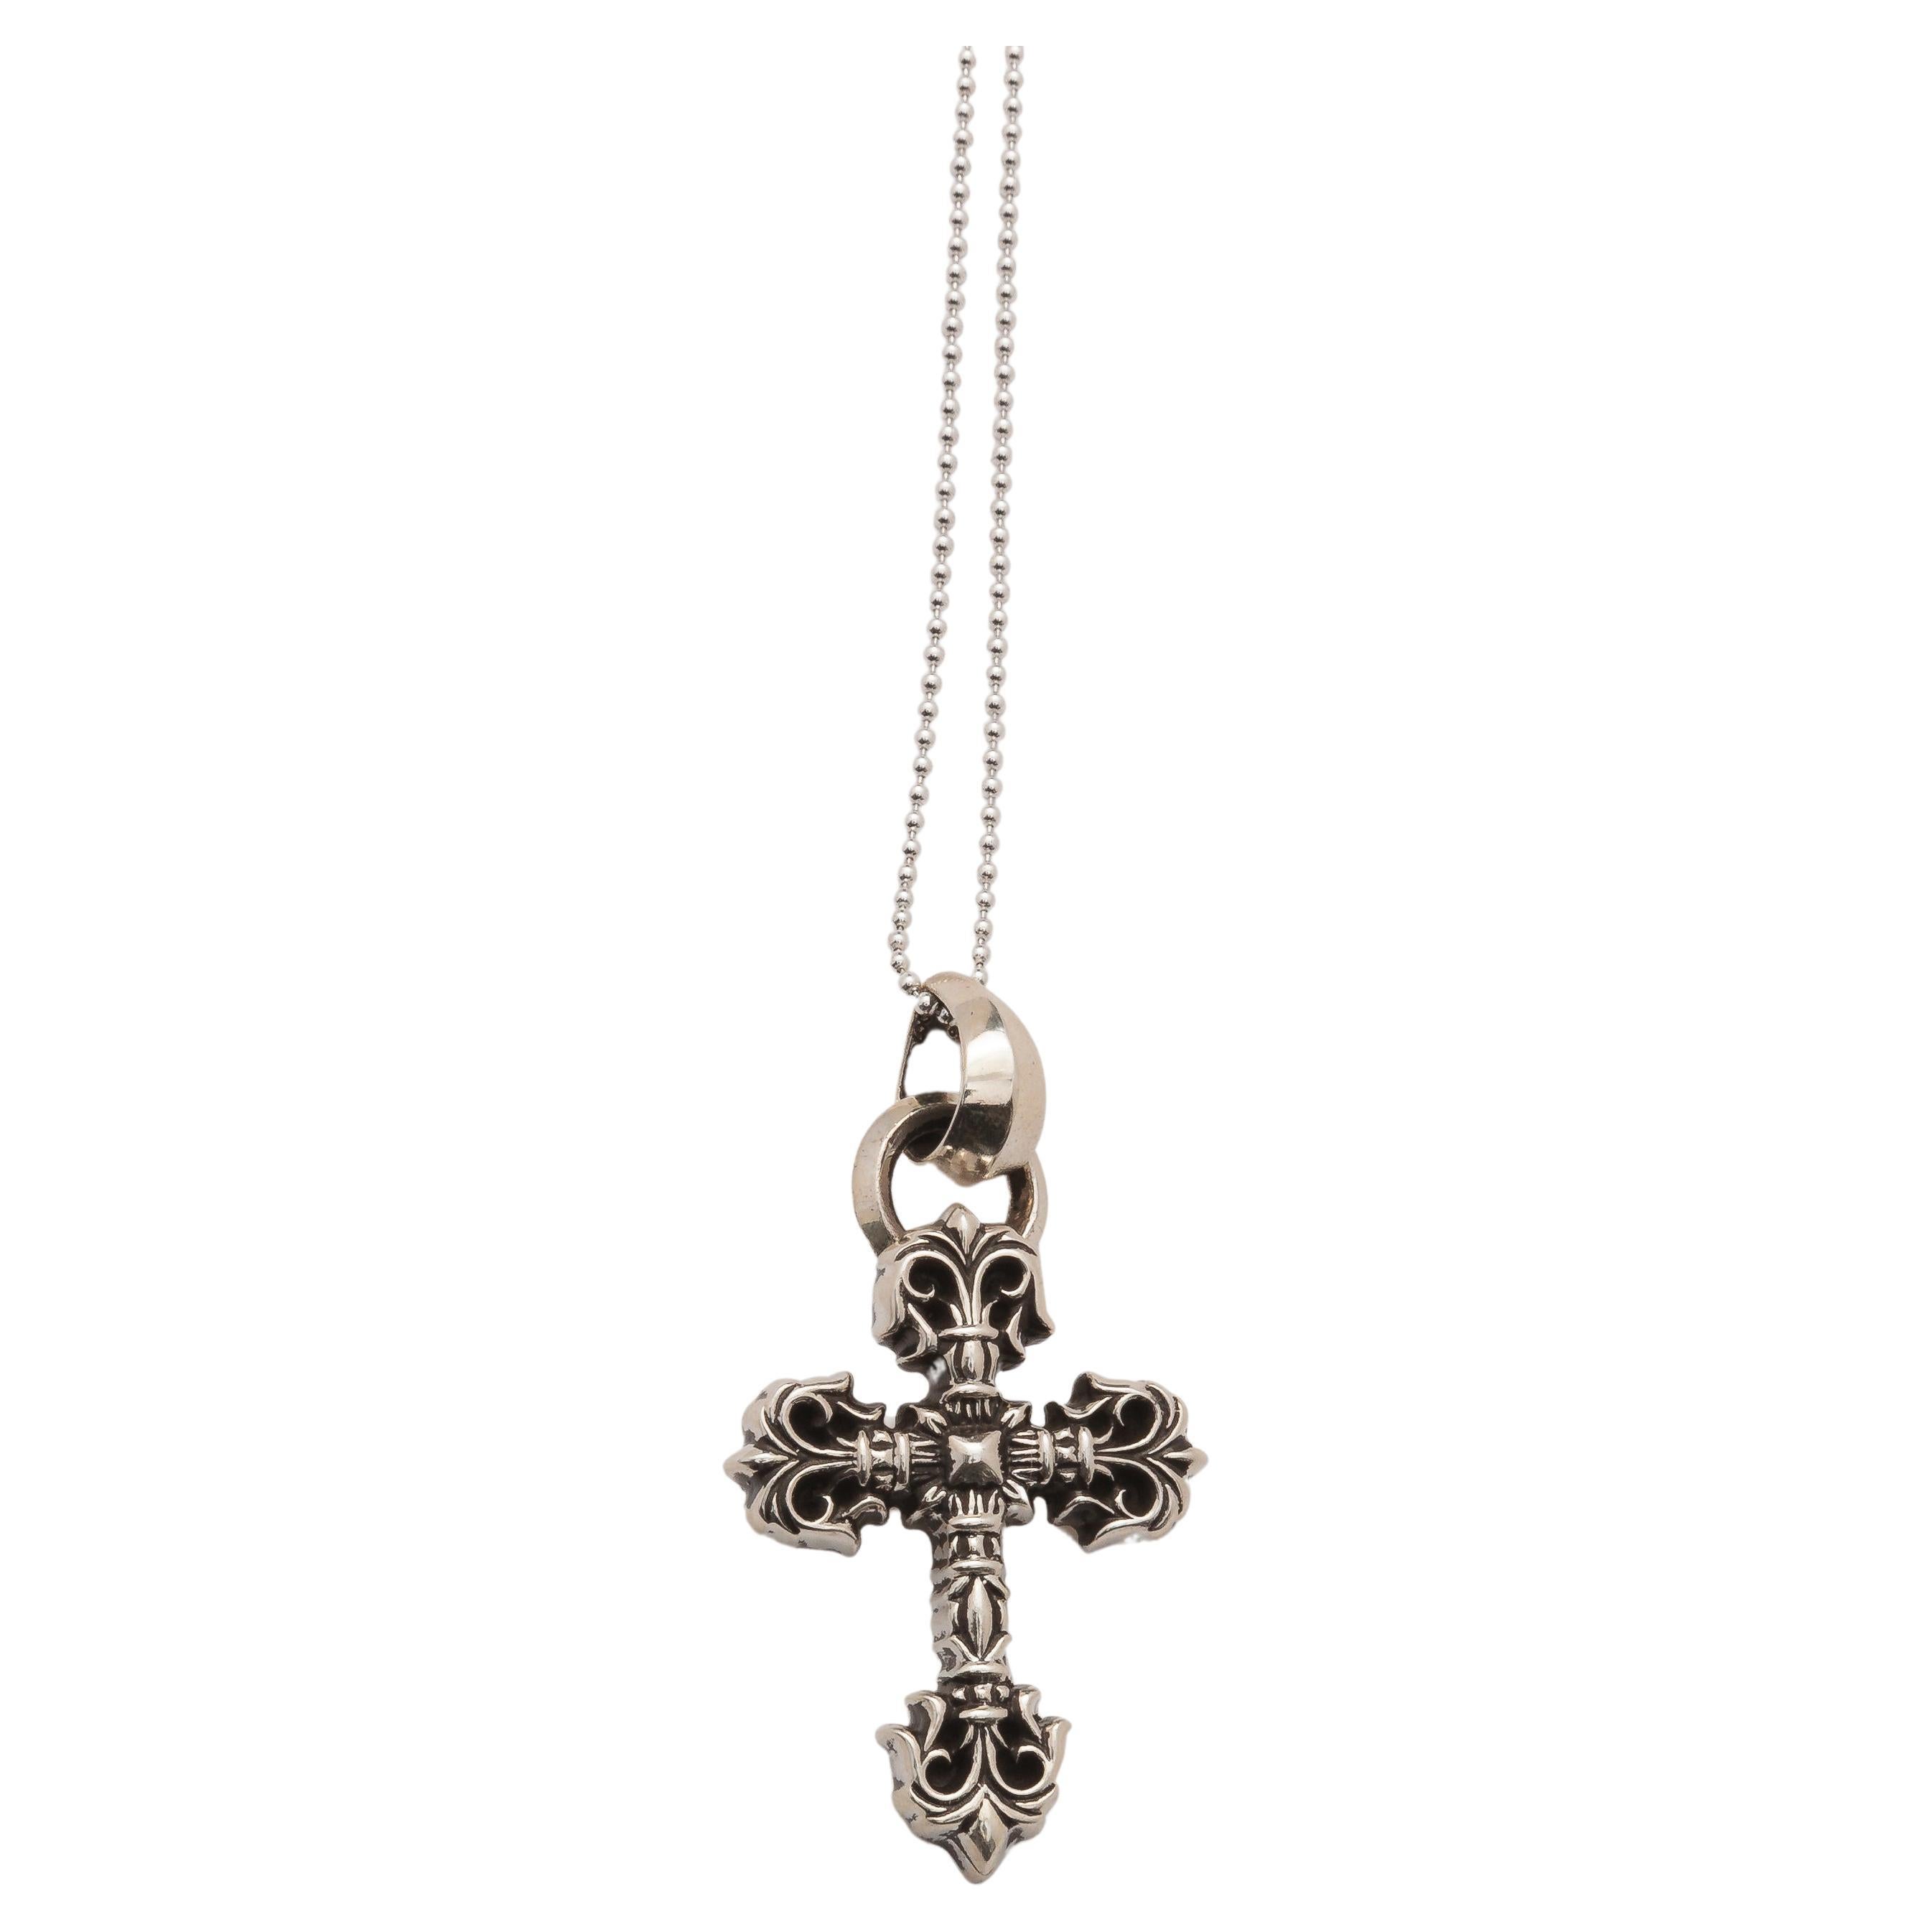 CHROME HEARTS Gothic Necklace with Cross Pendant 925 Sterling Silver | eBay